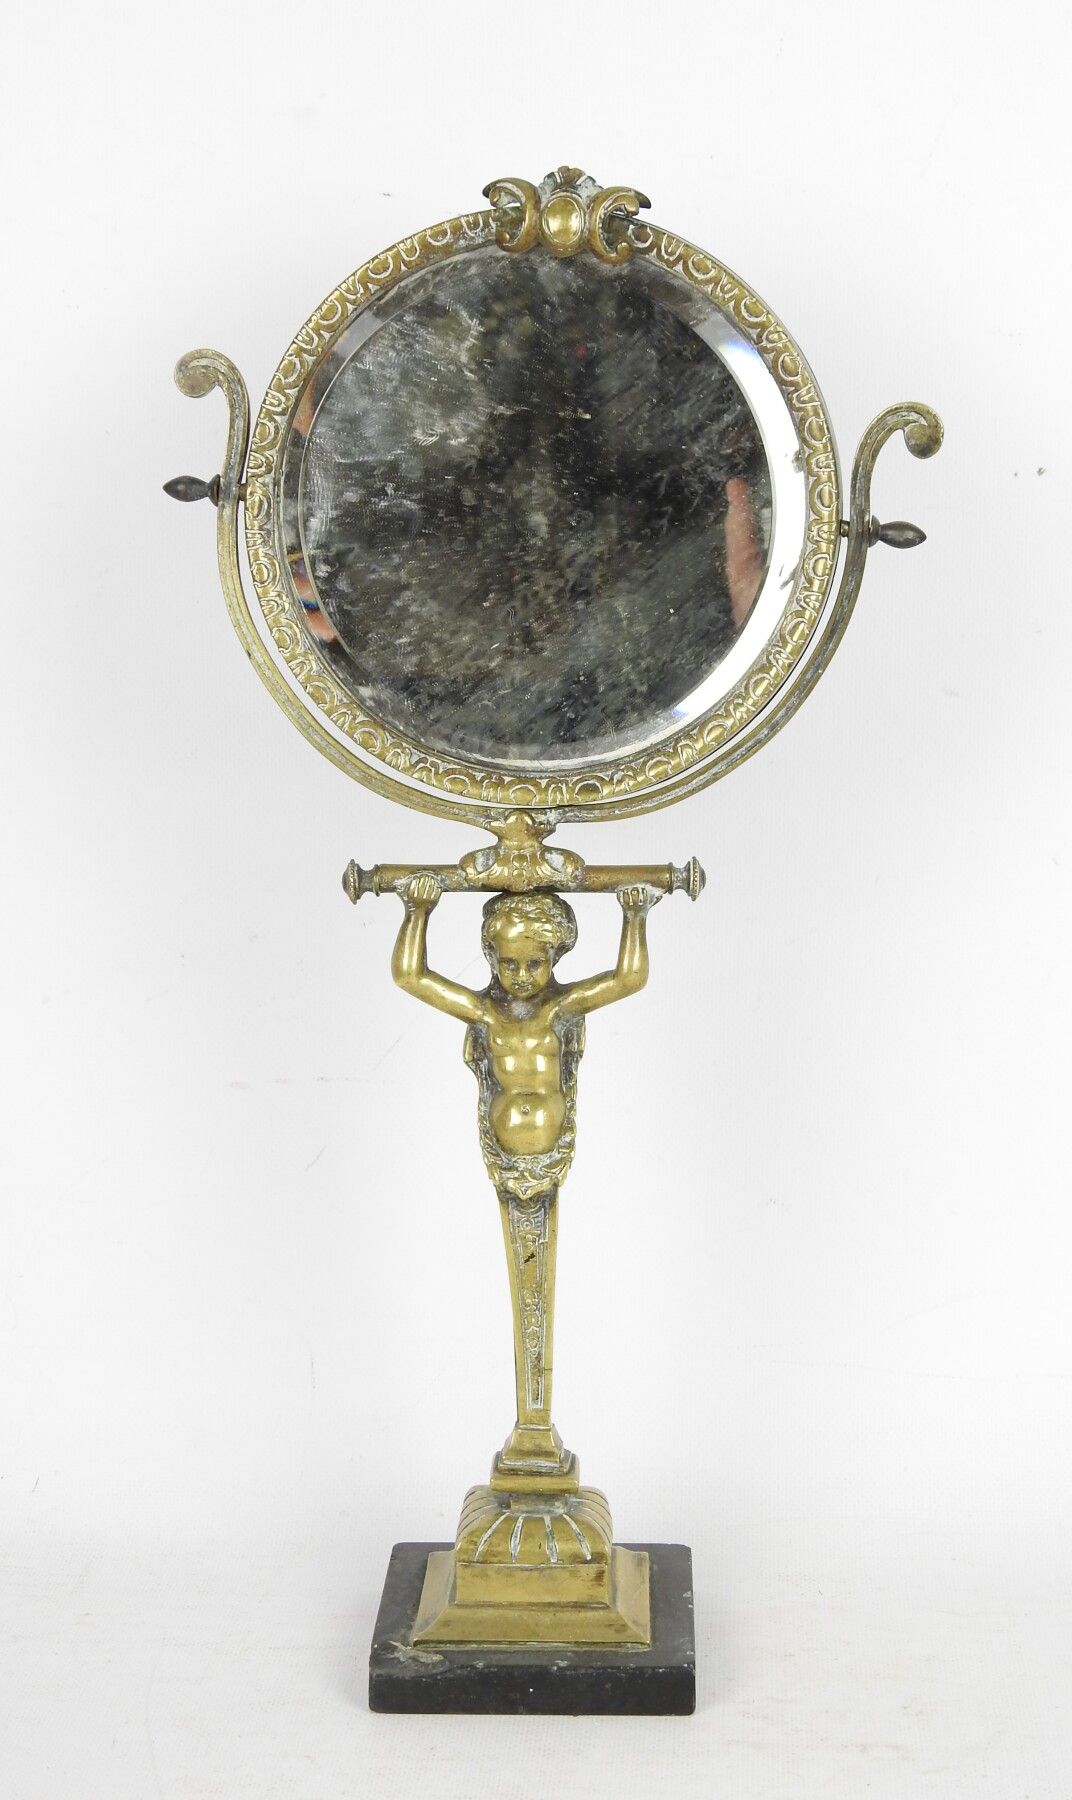 Null POPON : A circular gilt bronze PSYCHEE MIRROR supported by a foot represent&hellip;